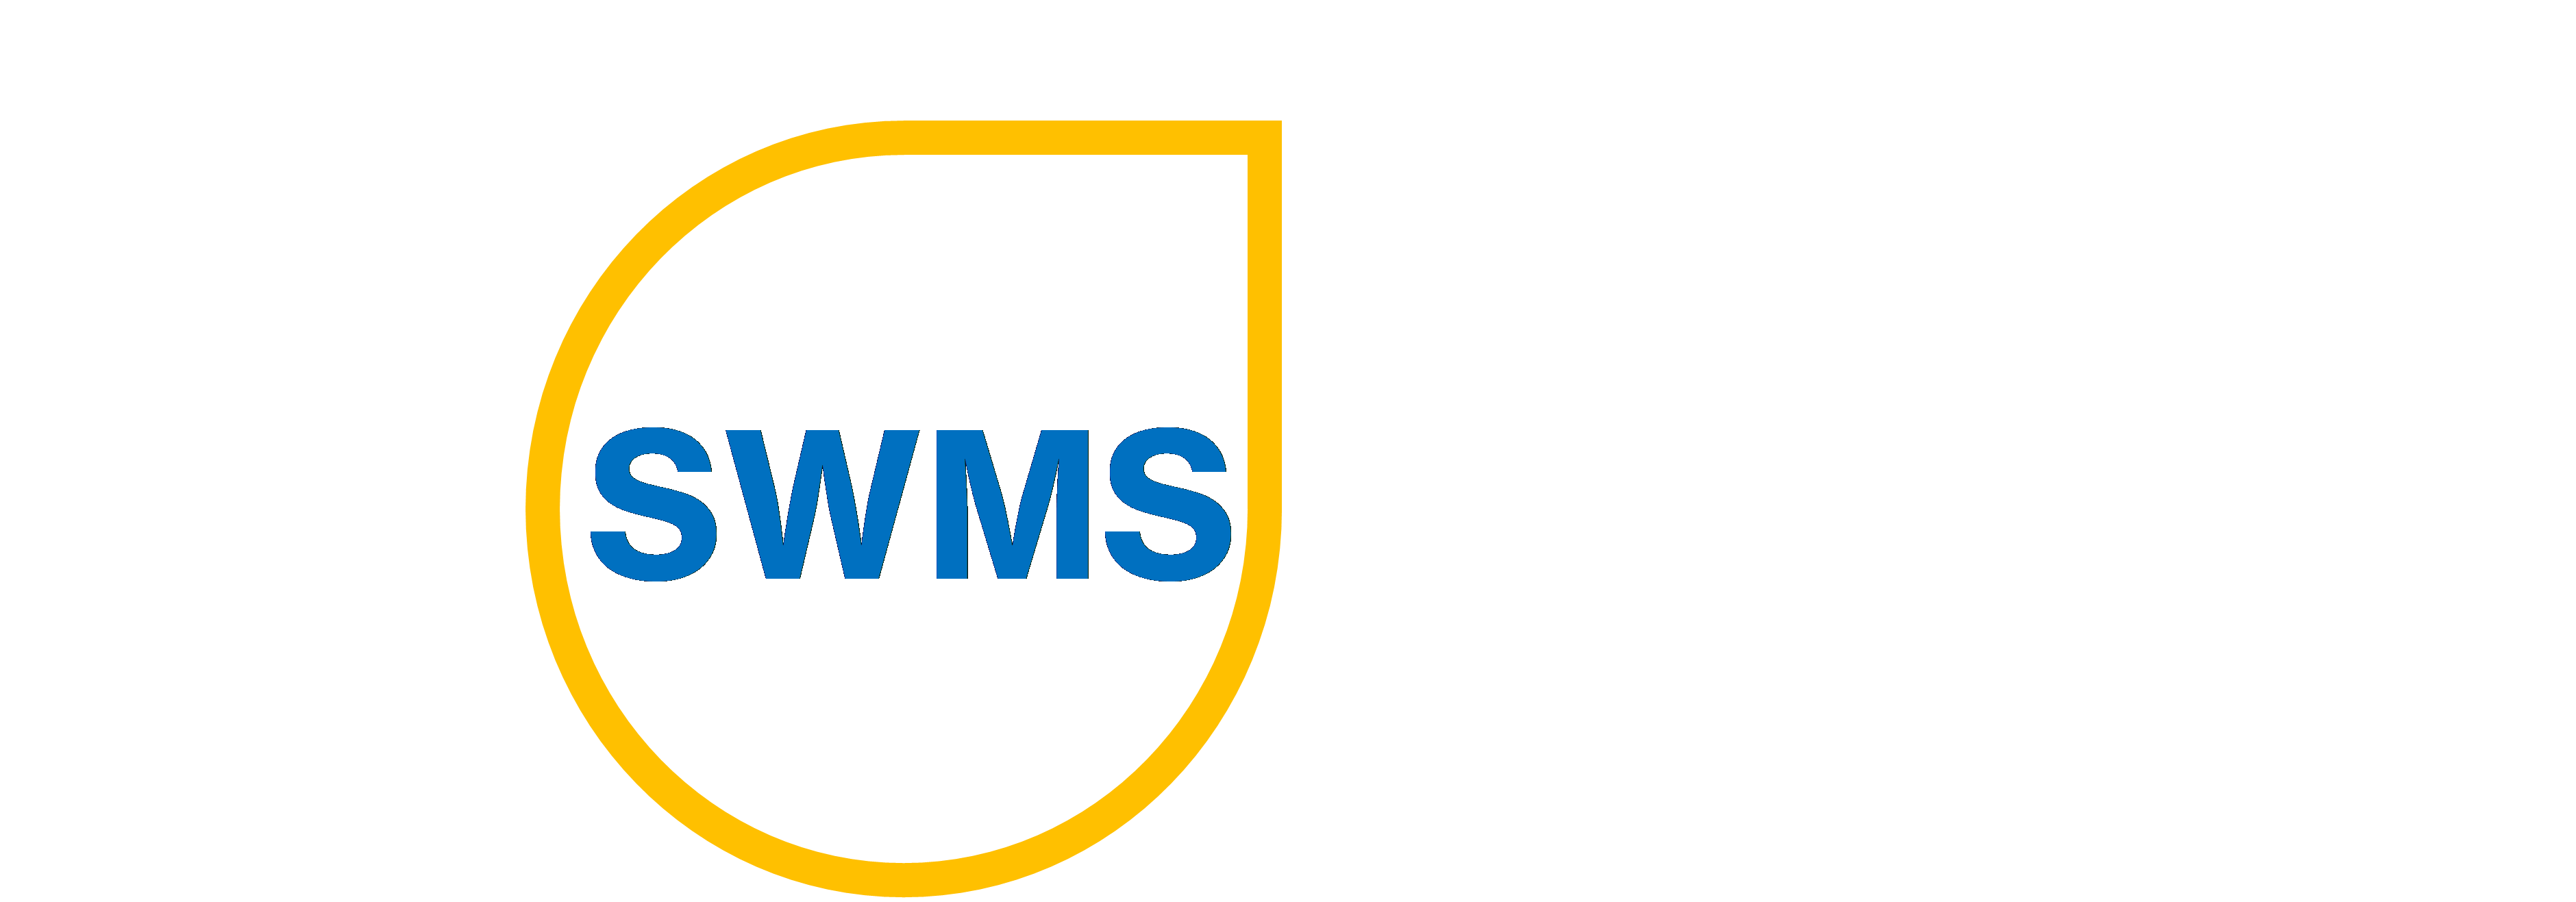 Safe Work Method Statement (SWMS) Templates, OHS Policy and Cm3 Help | SafetyDocs